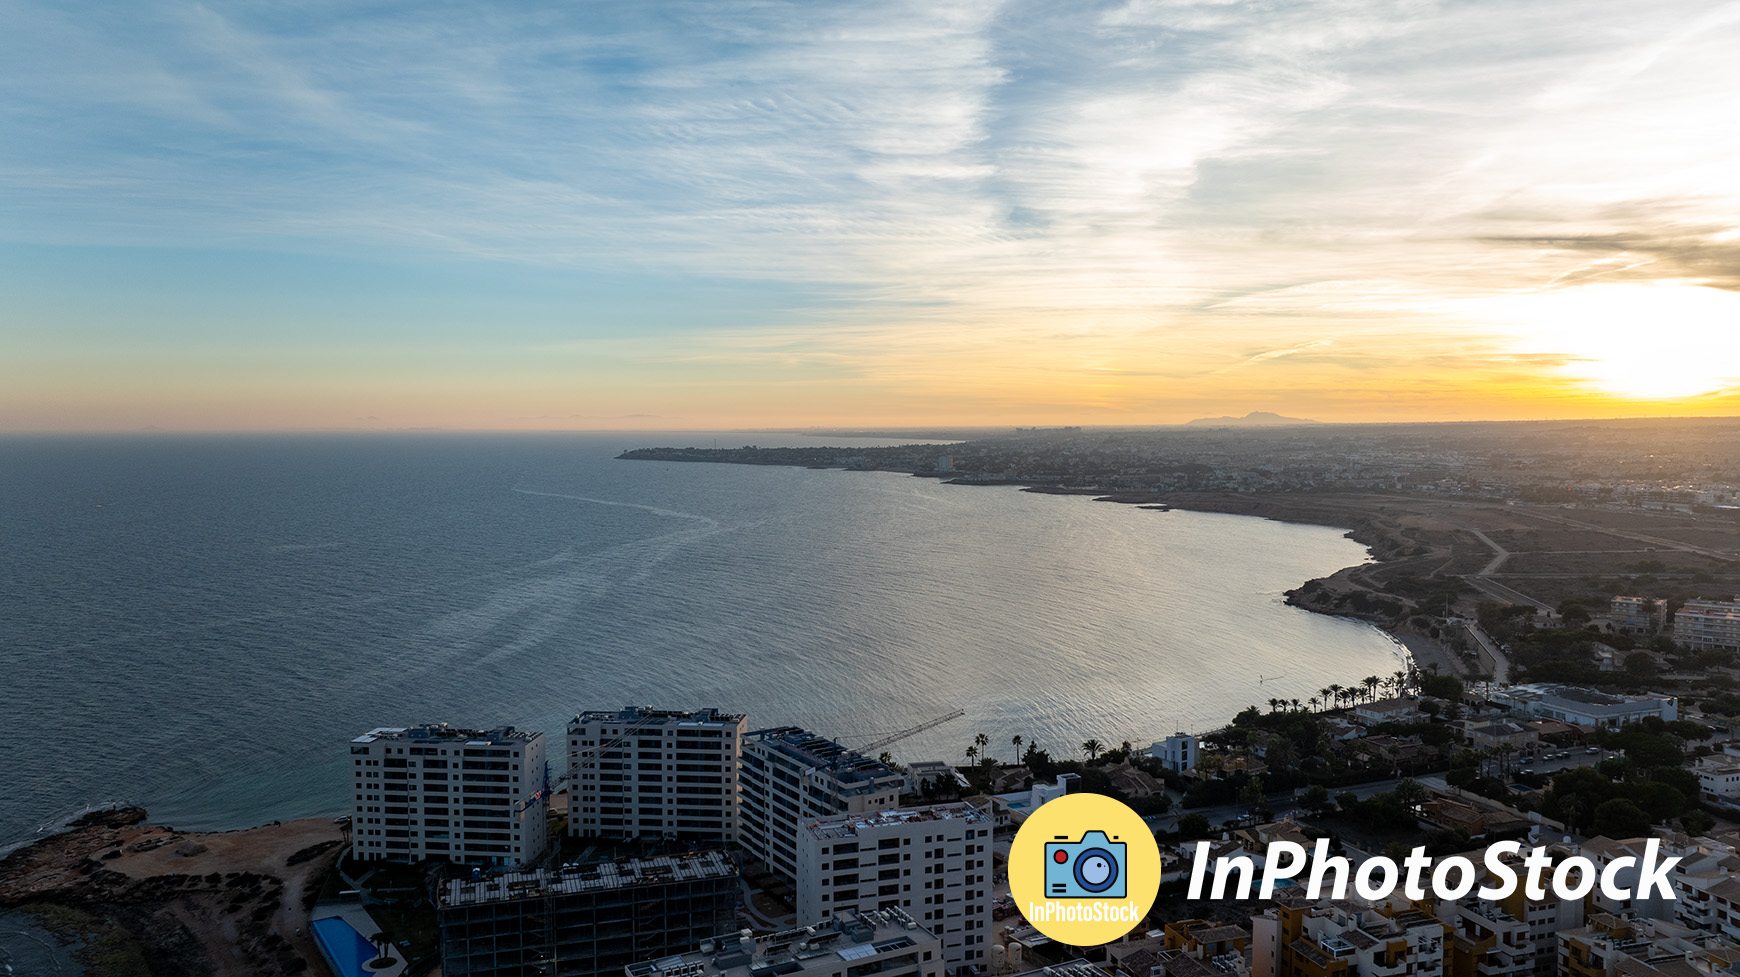 Punta Prima on the Costa Blanca Spain - view from the drone.